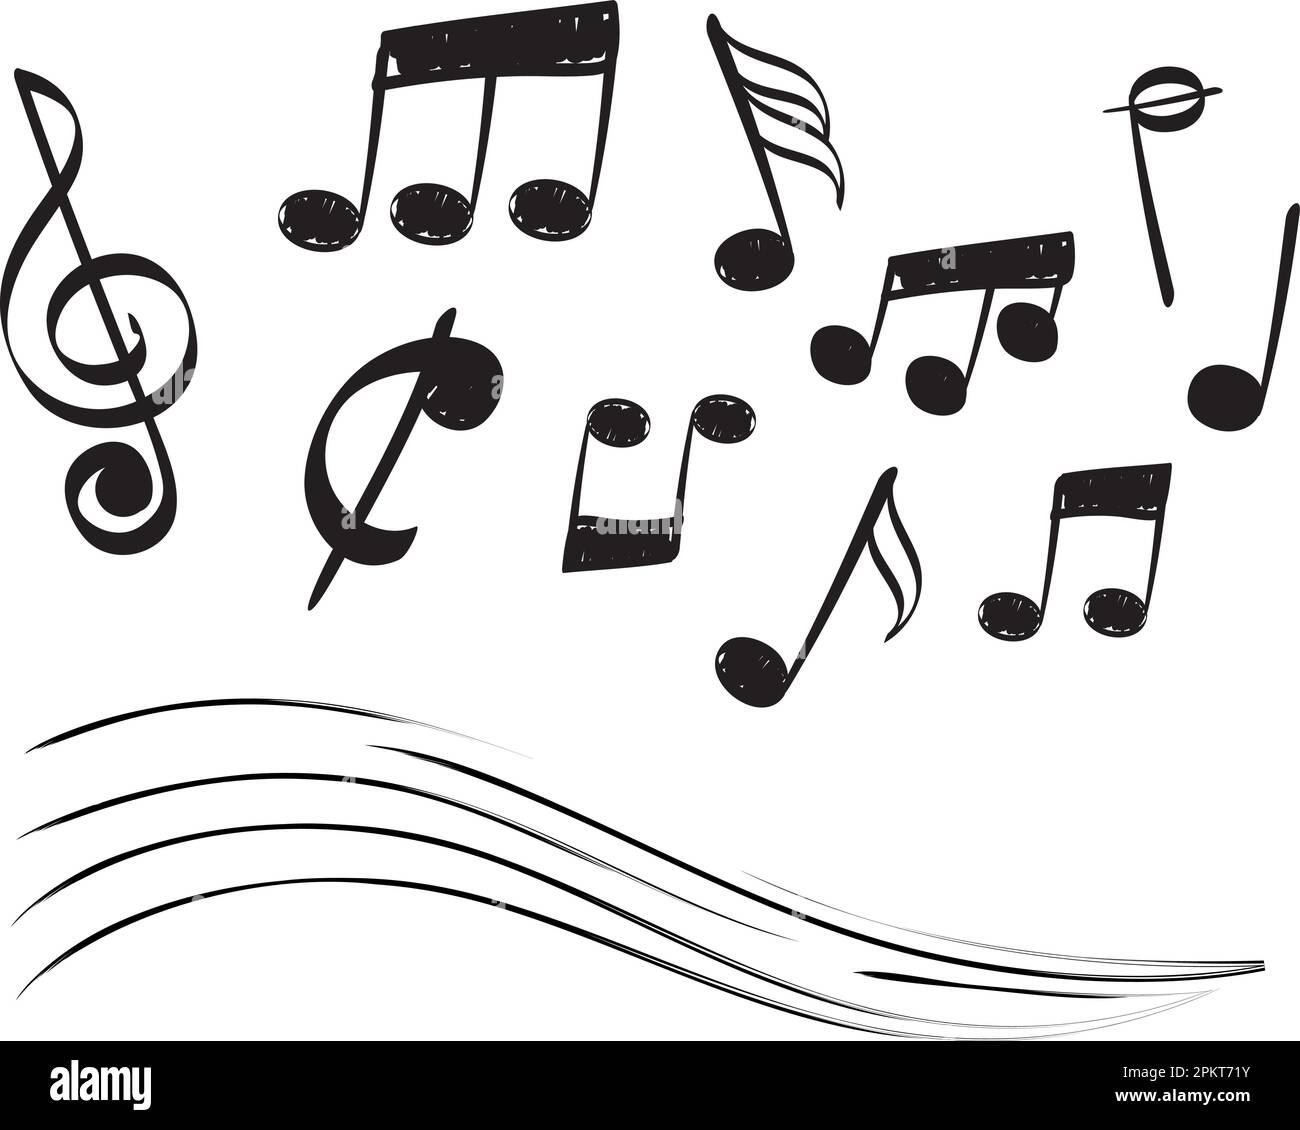 Doodle music notes. Simple song drawing musical symbols, singing melody ...